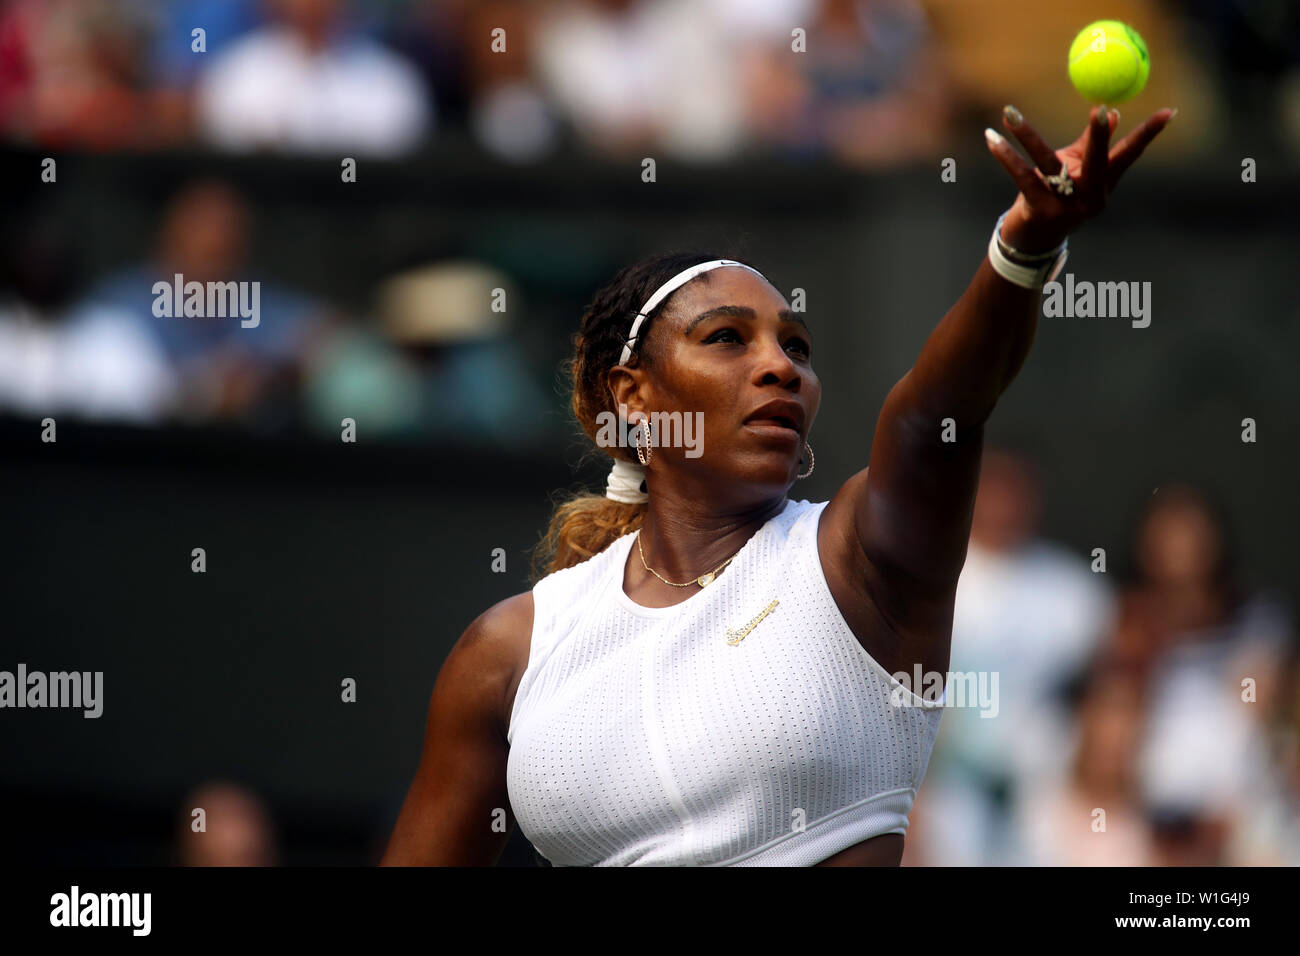 London, UK. 02nd July, 2019. Wimbledon, 2 July 2019 - Serena Williams serving during her first round victory over Giulia Gato-Monticone of Italy. Credit: Adam Stoltman/Alamy Live News Stock Photo